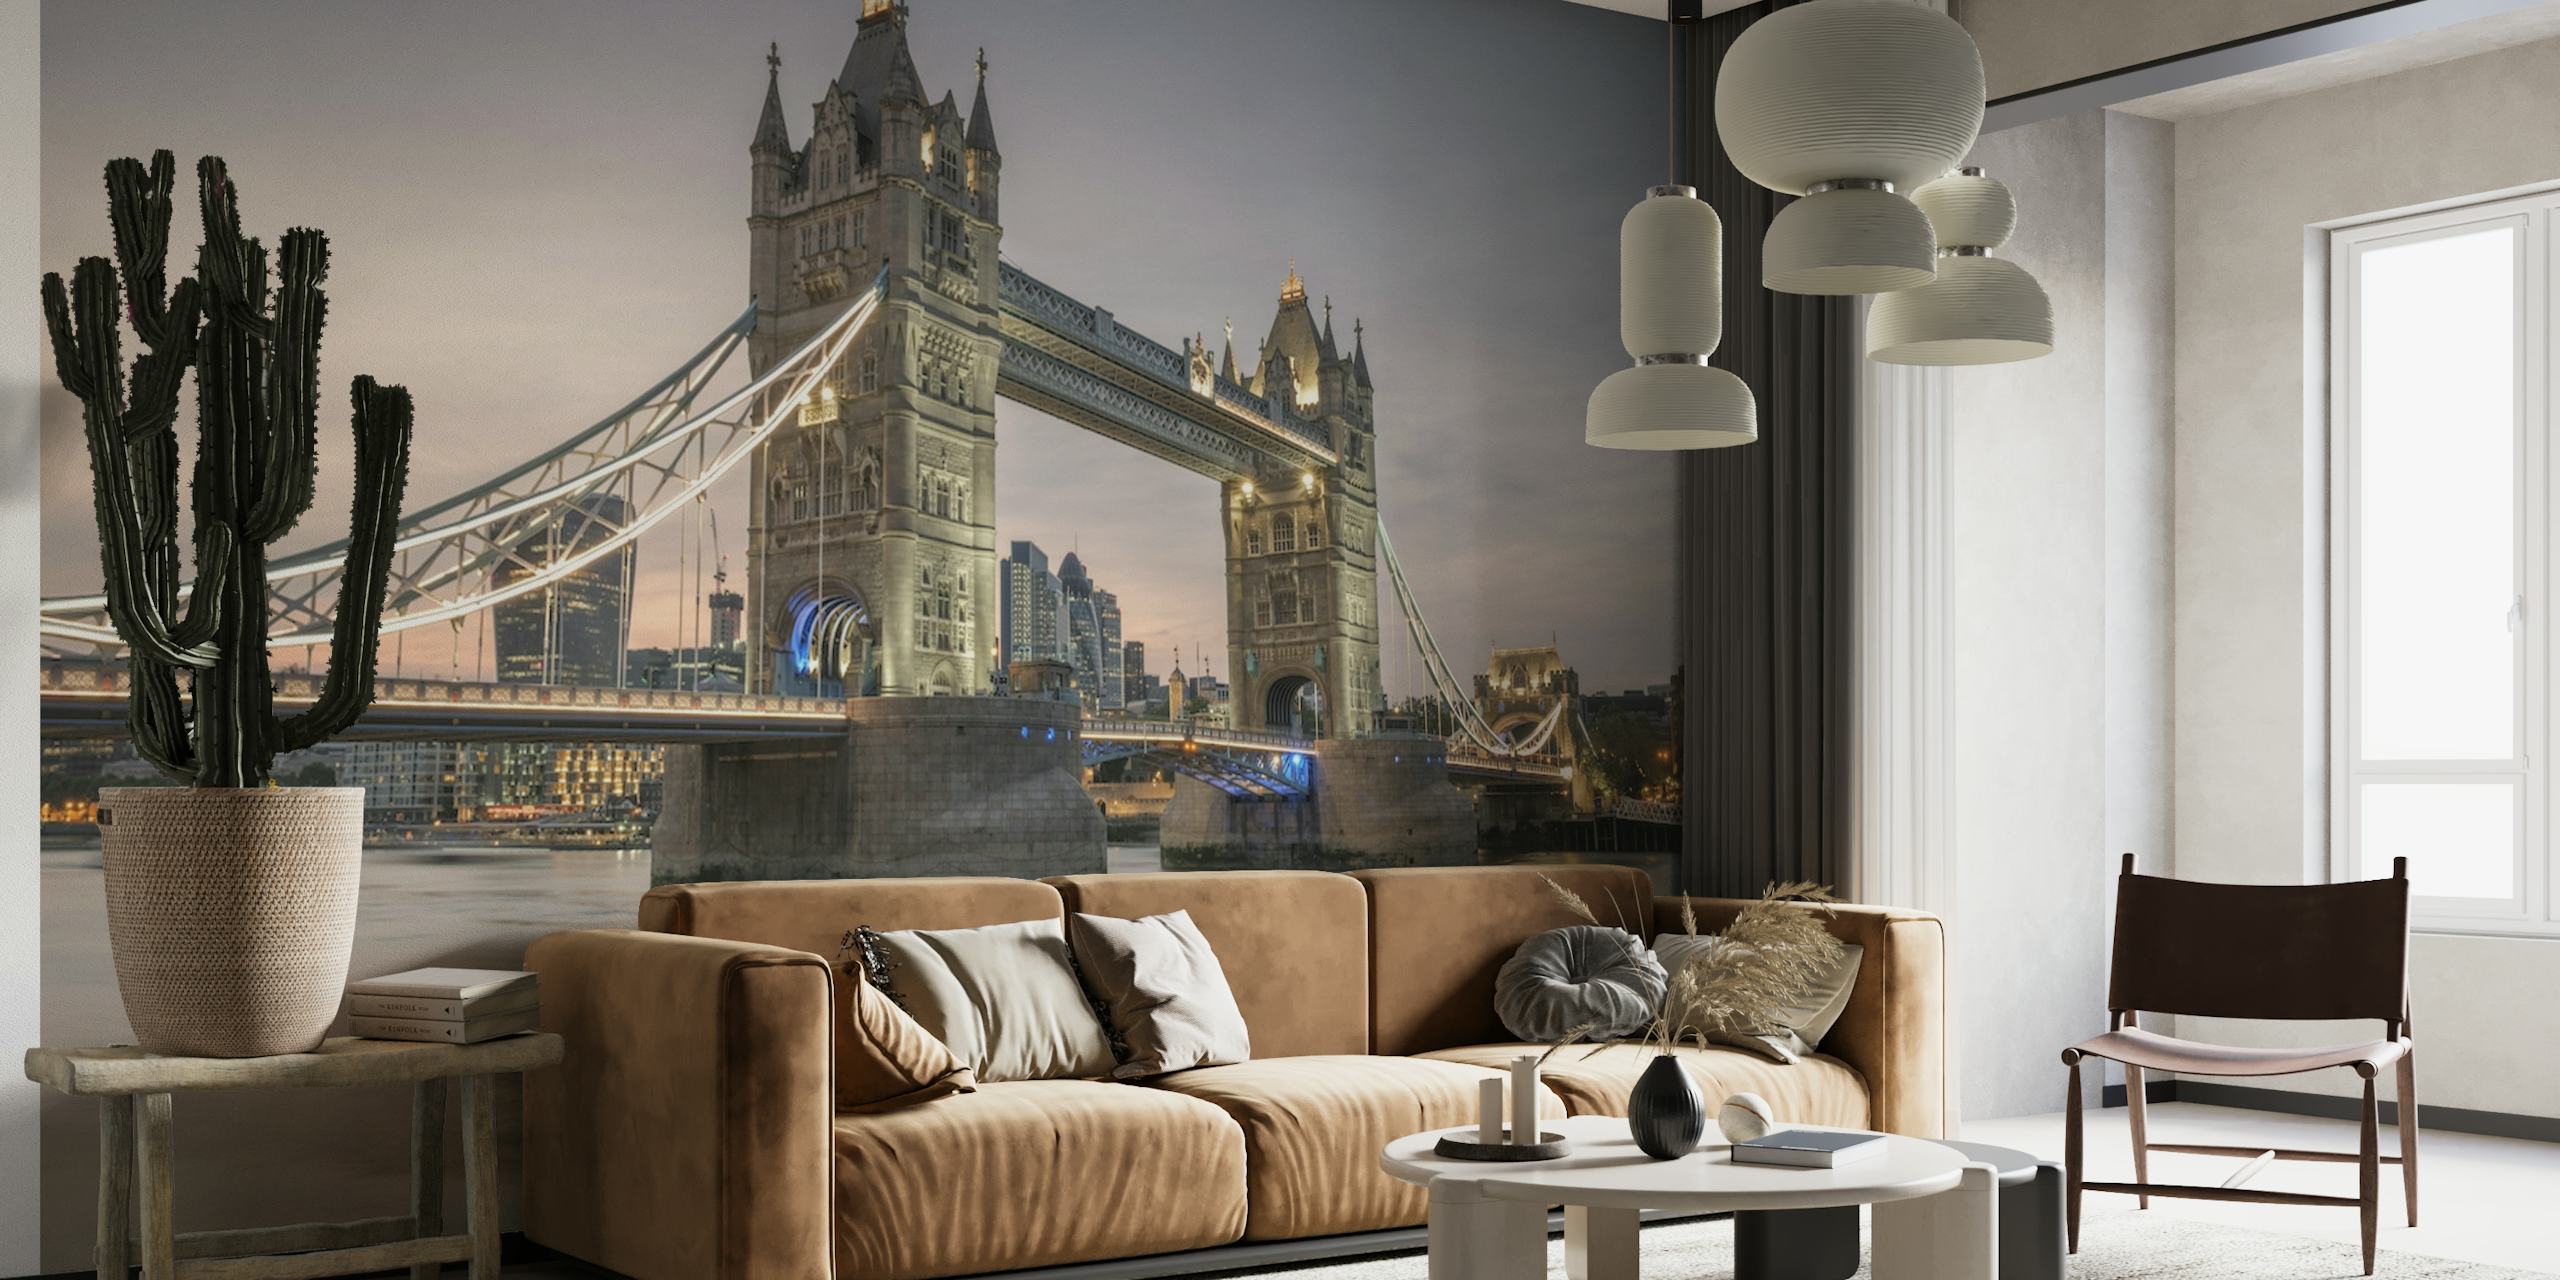 Tower Bridge wall mural showing a sunset view over the Thames River